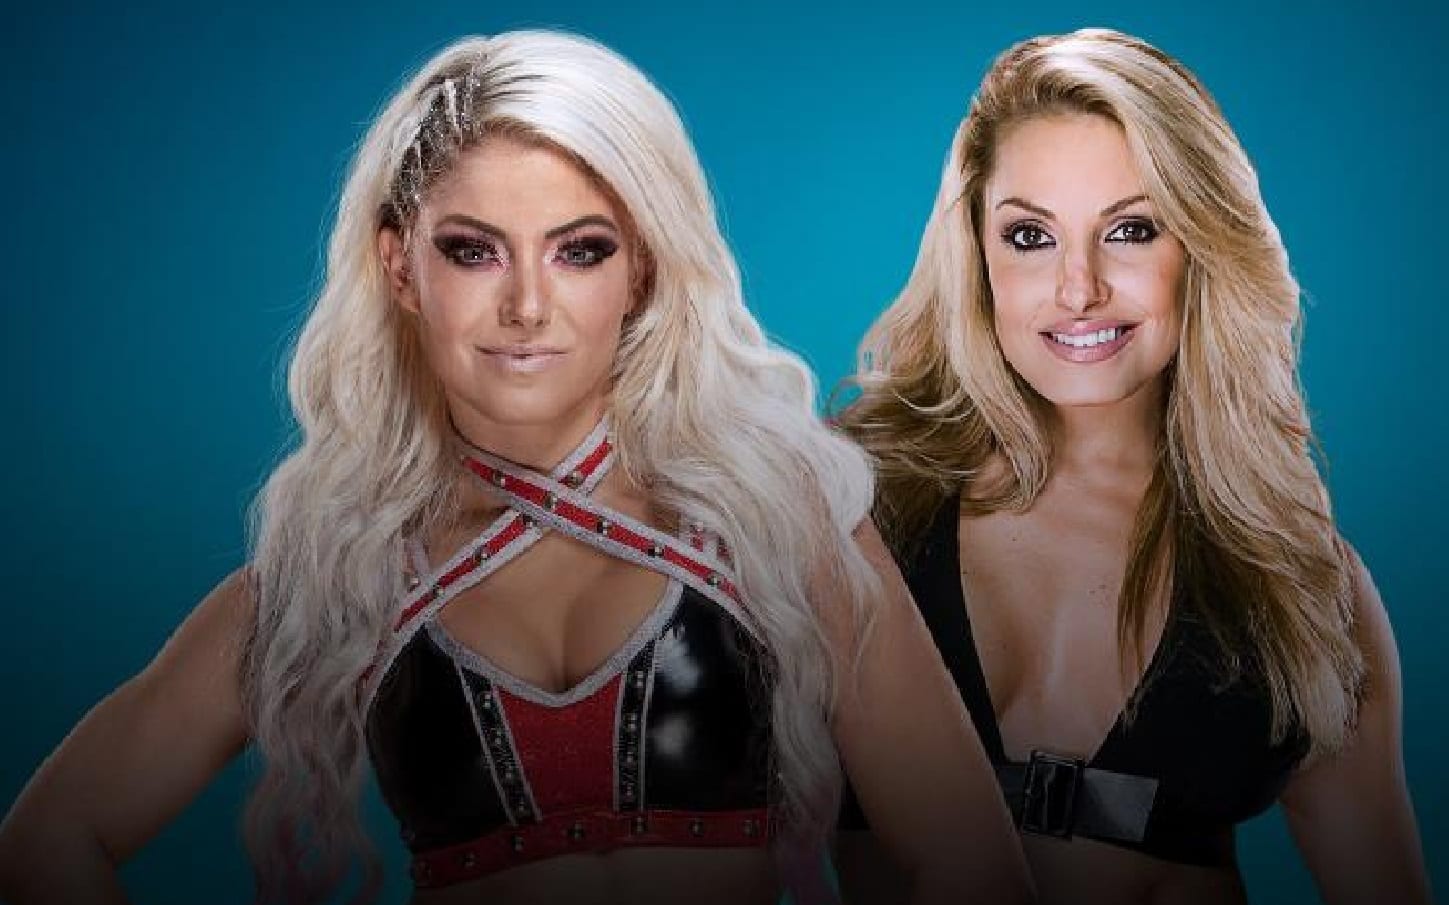 Trish Stratus Says There’s Still Time For Match Against Alexa Bliss